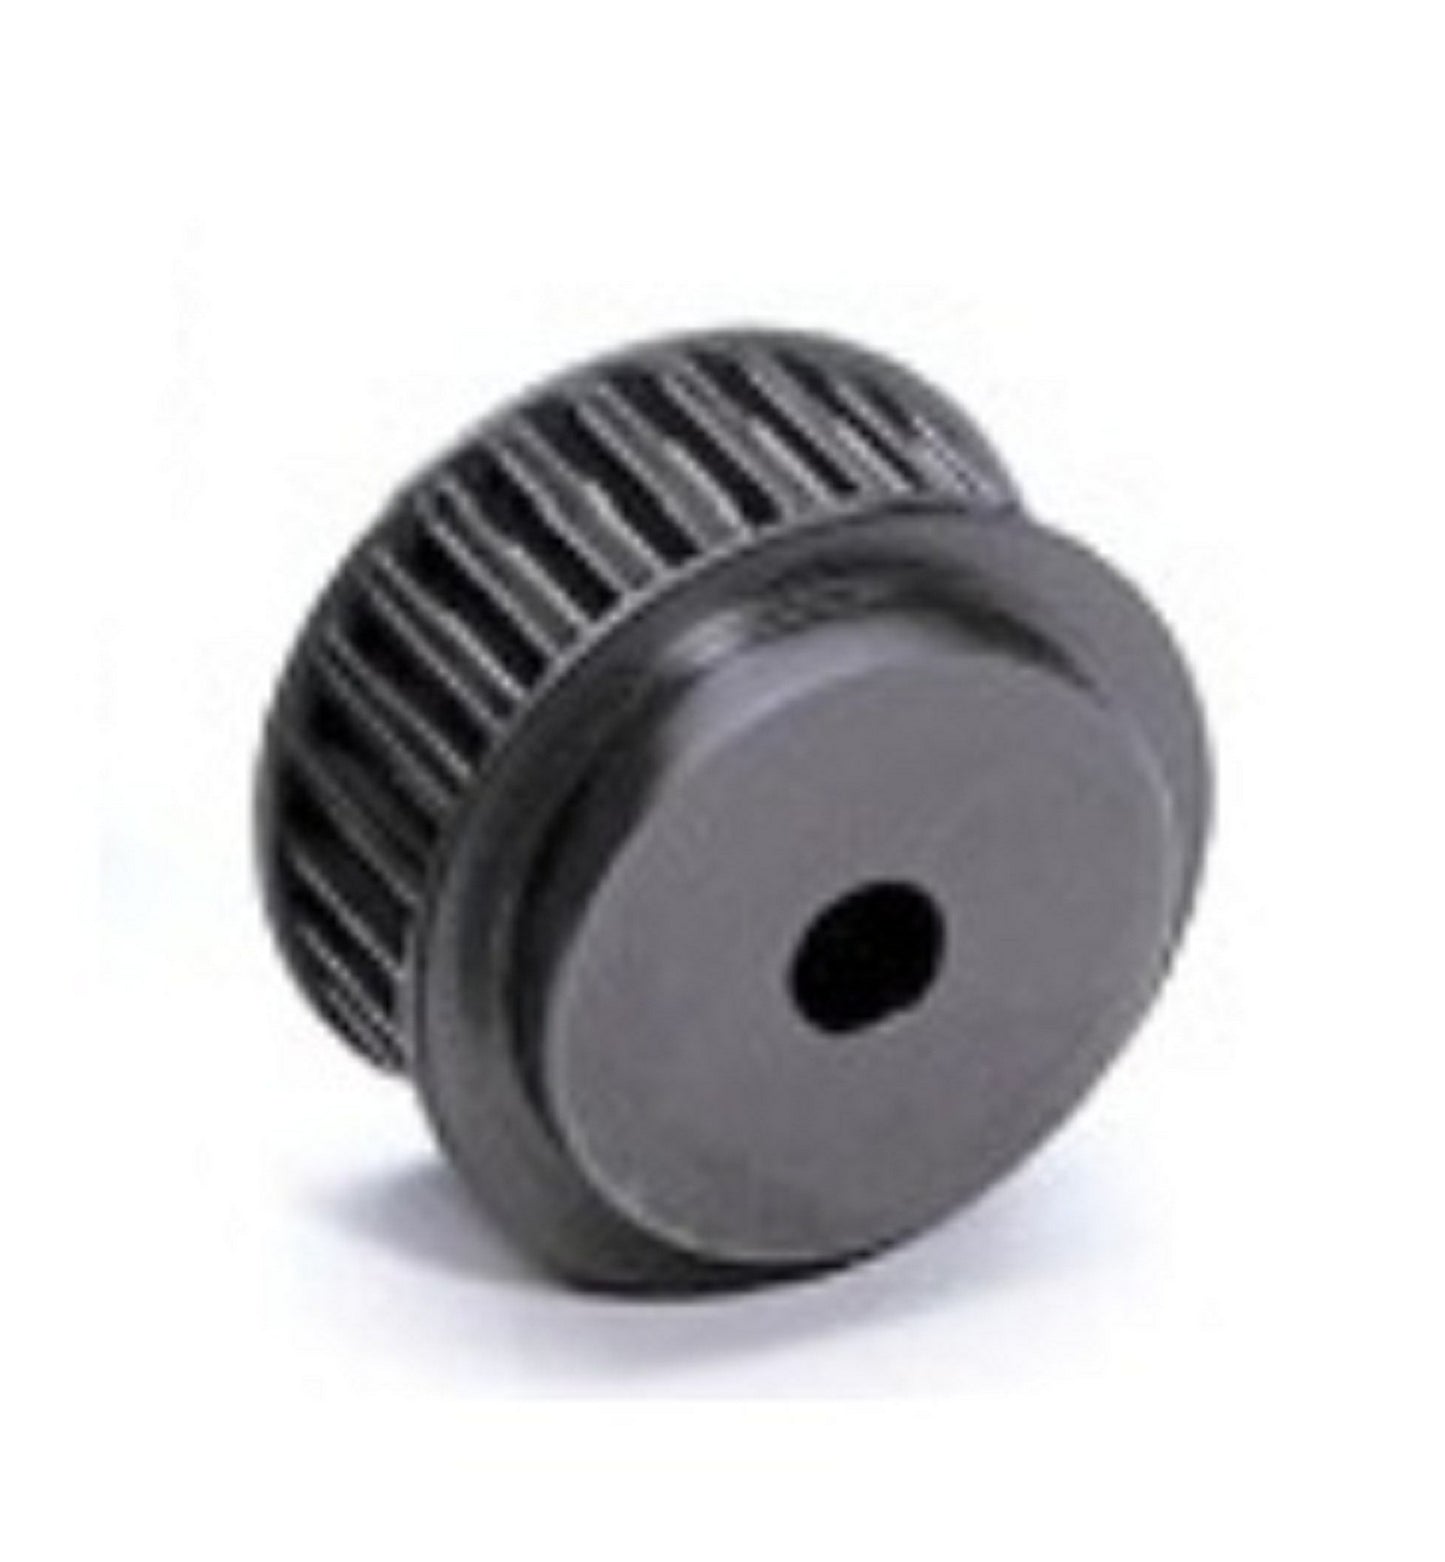 22-8M-30 Steel Timing Pulley 22 tooth